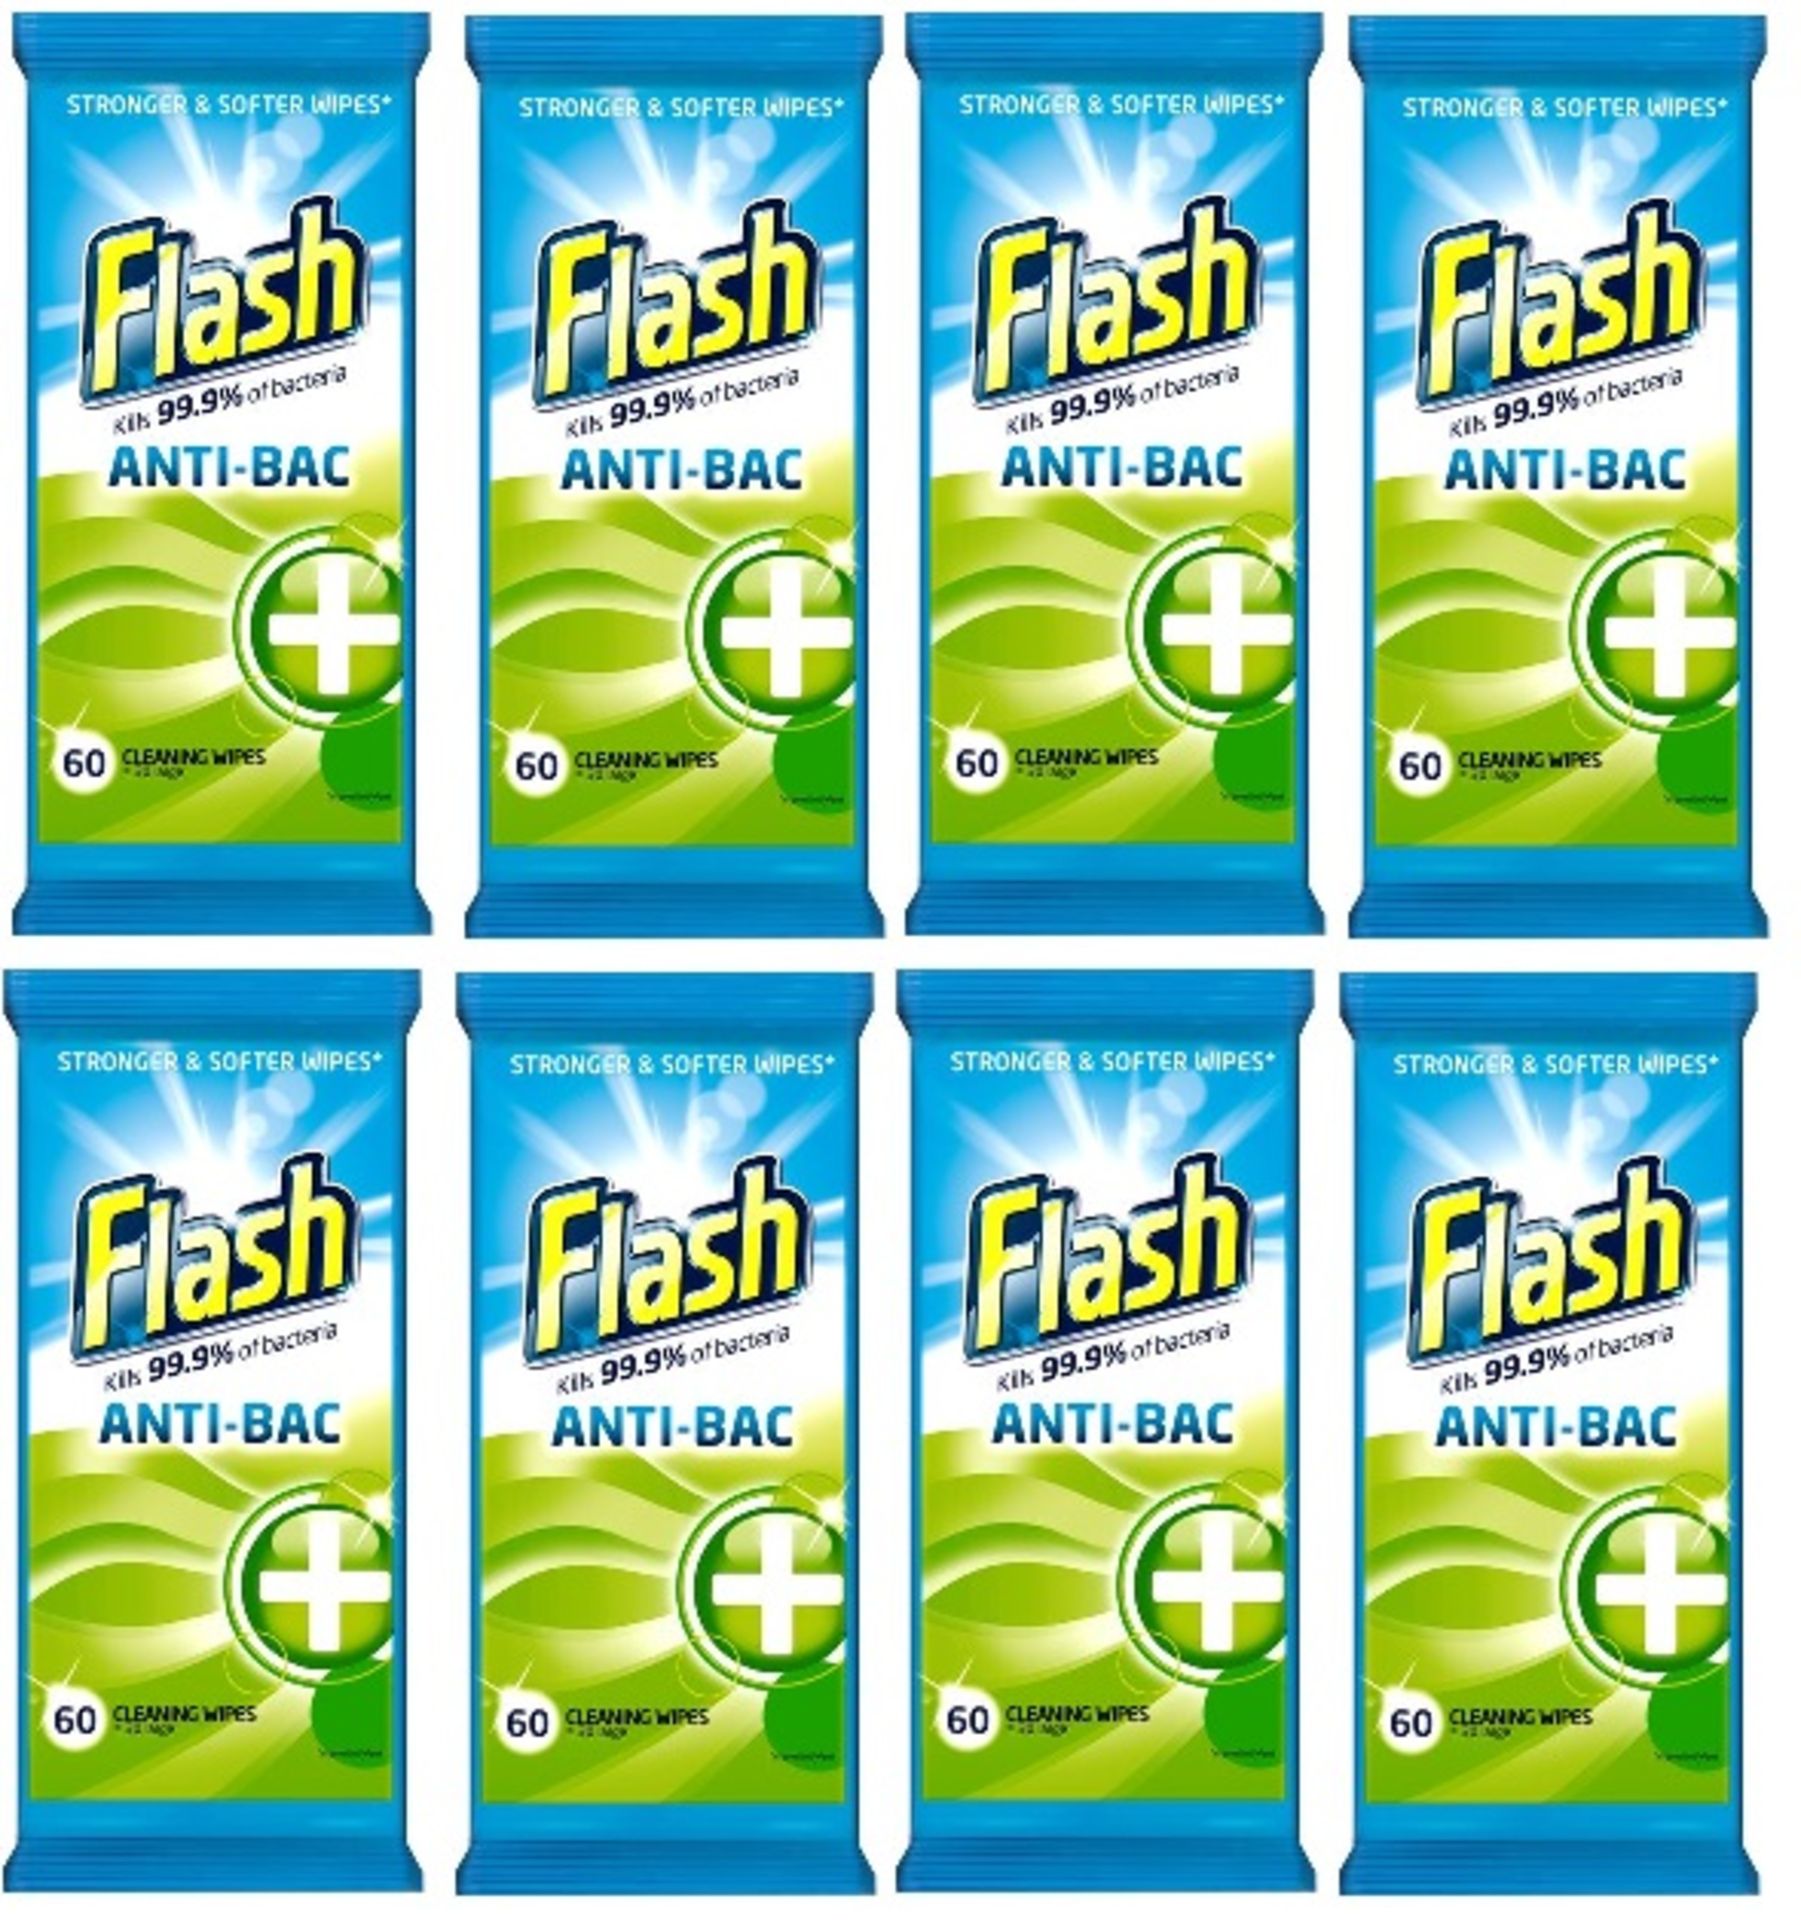 V *TRADE QTY* Brand New Pack Of 8 Flash Anti-Bac Plus Wipes (x60 wipes) Sainsbury Price £16.00 Total